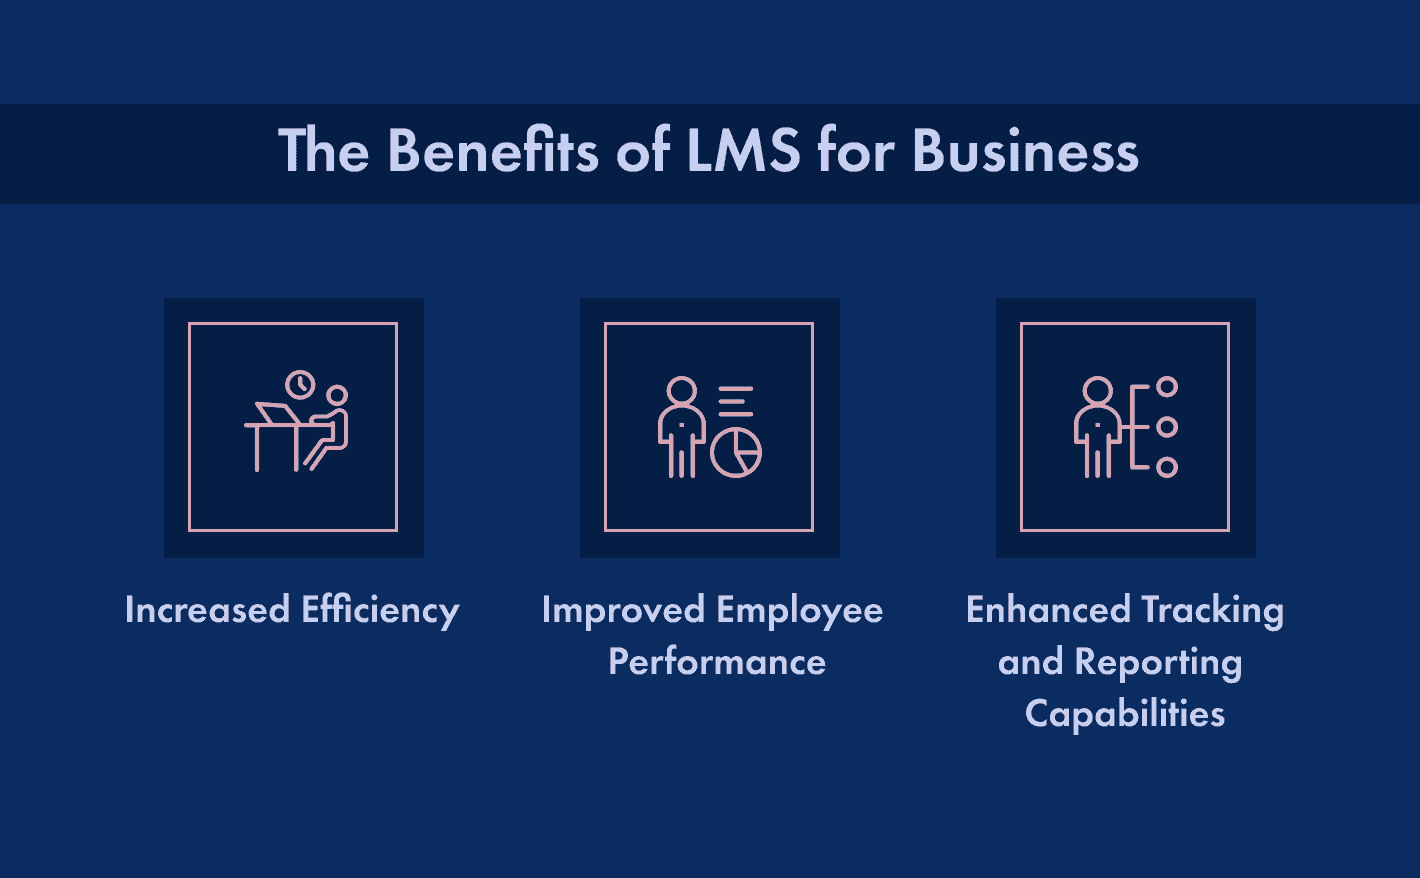 The benefits of LMS for business